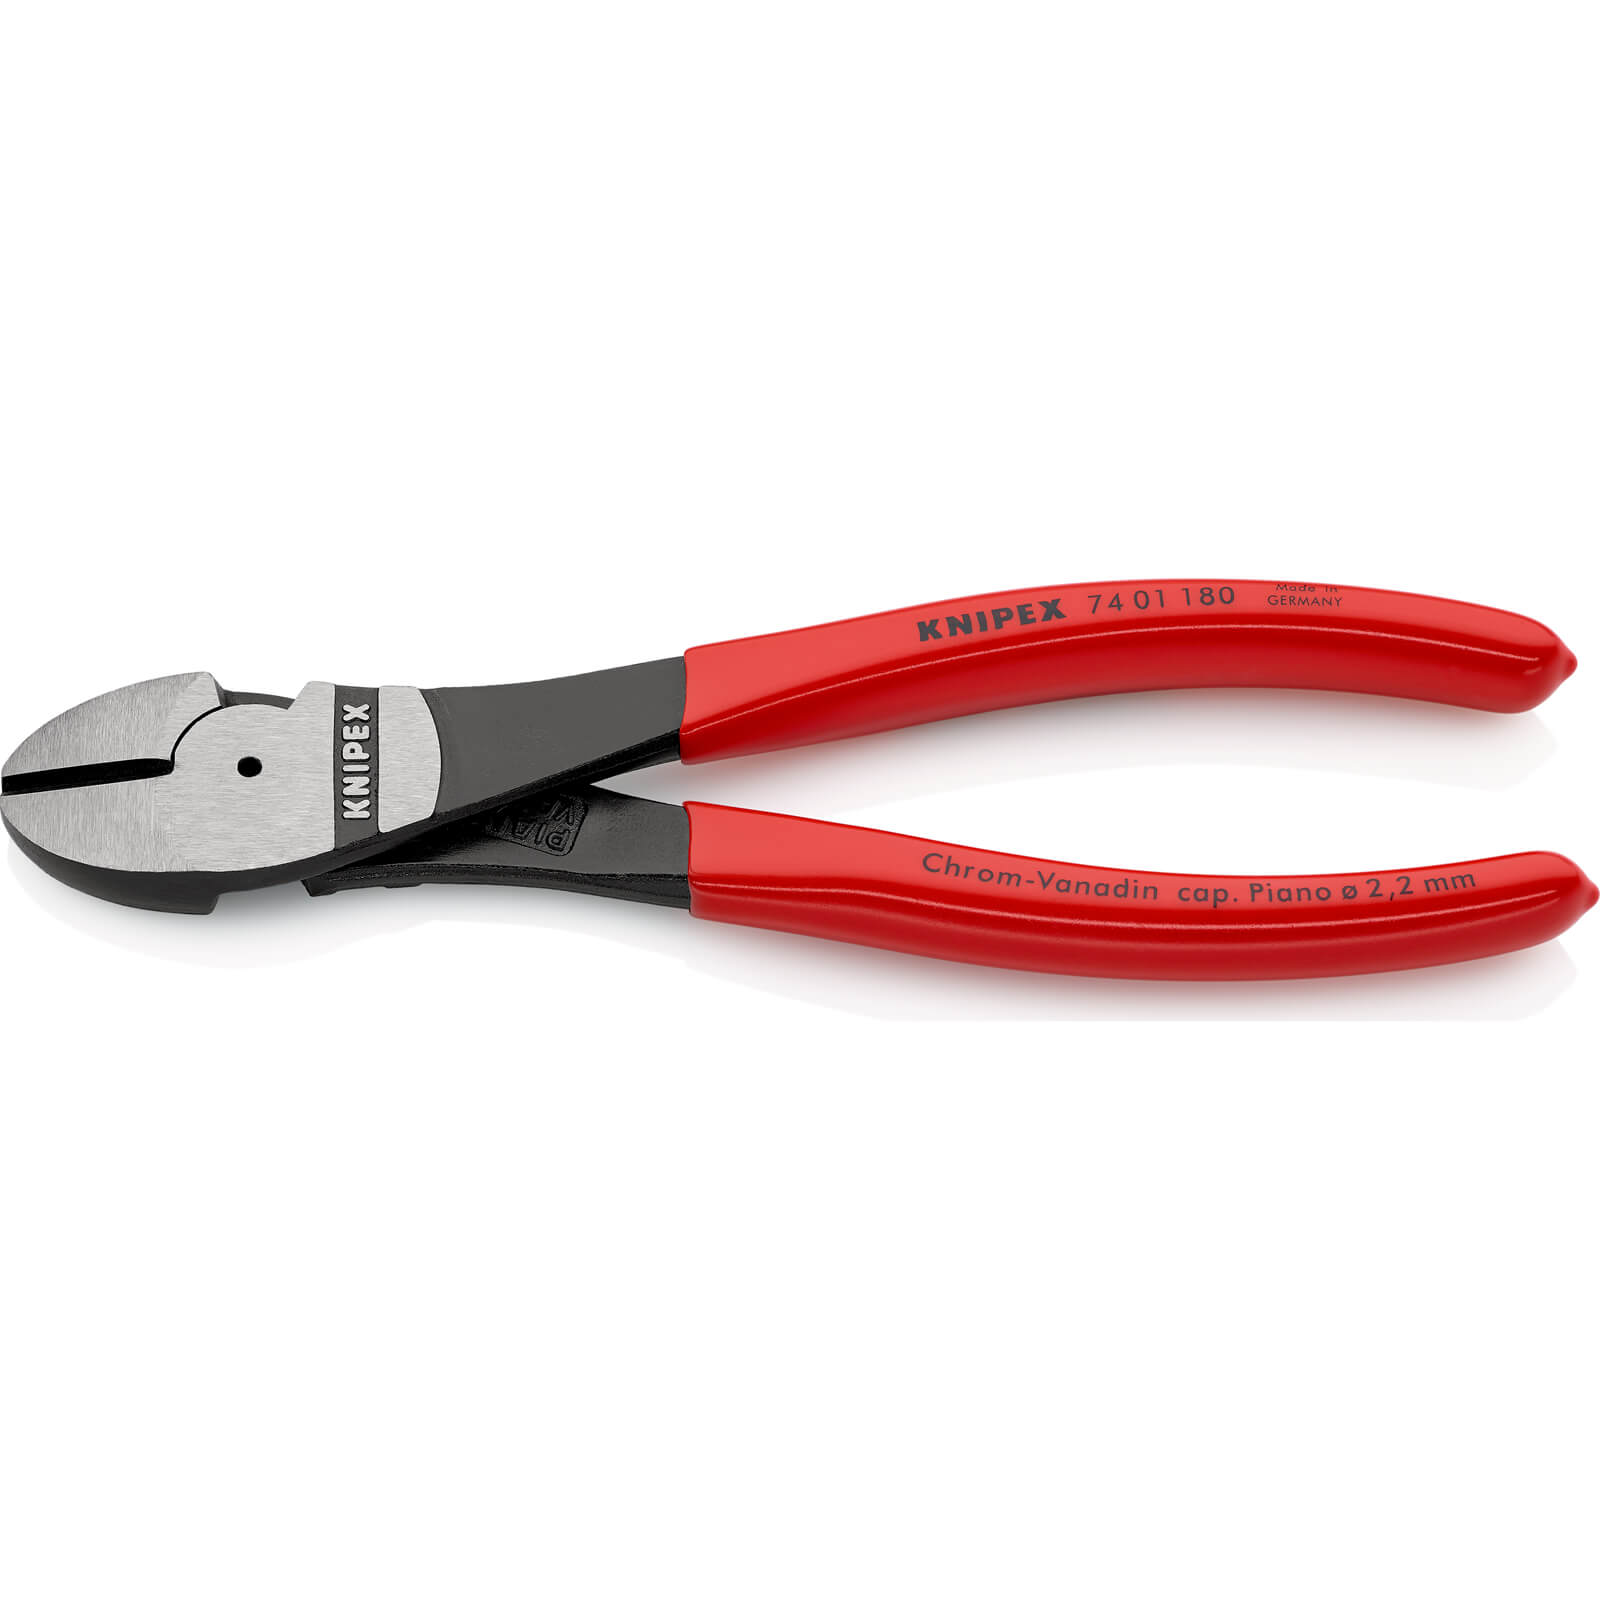 Photo of Knipex 74 01 High Leverage Diagonal Cutting Pliers 180mm